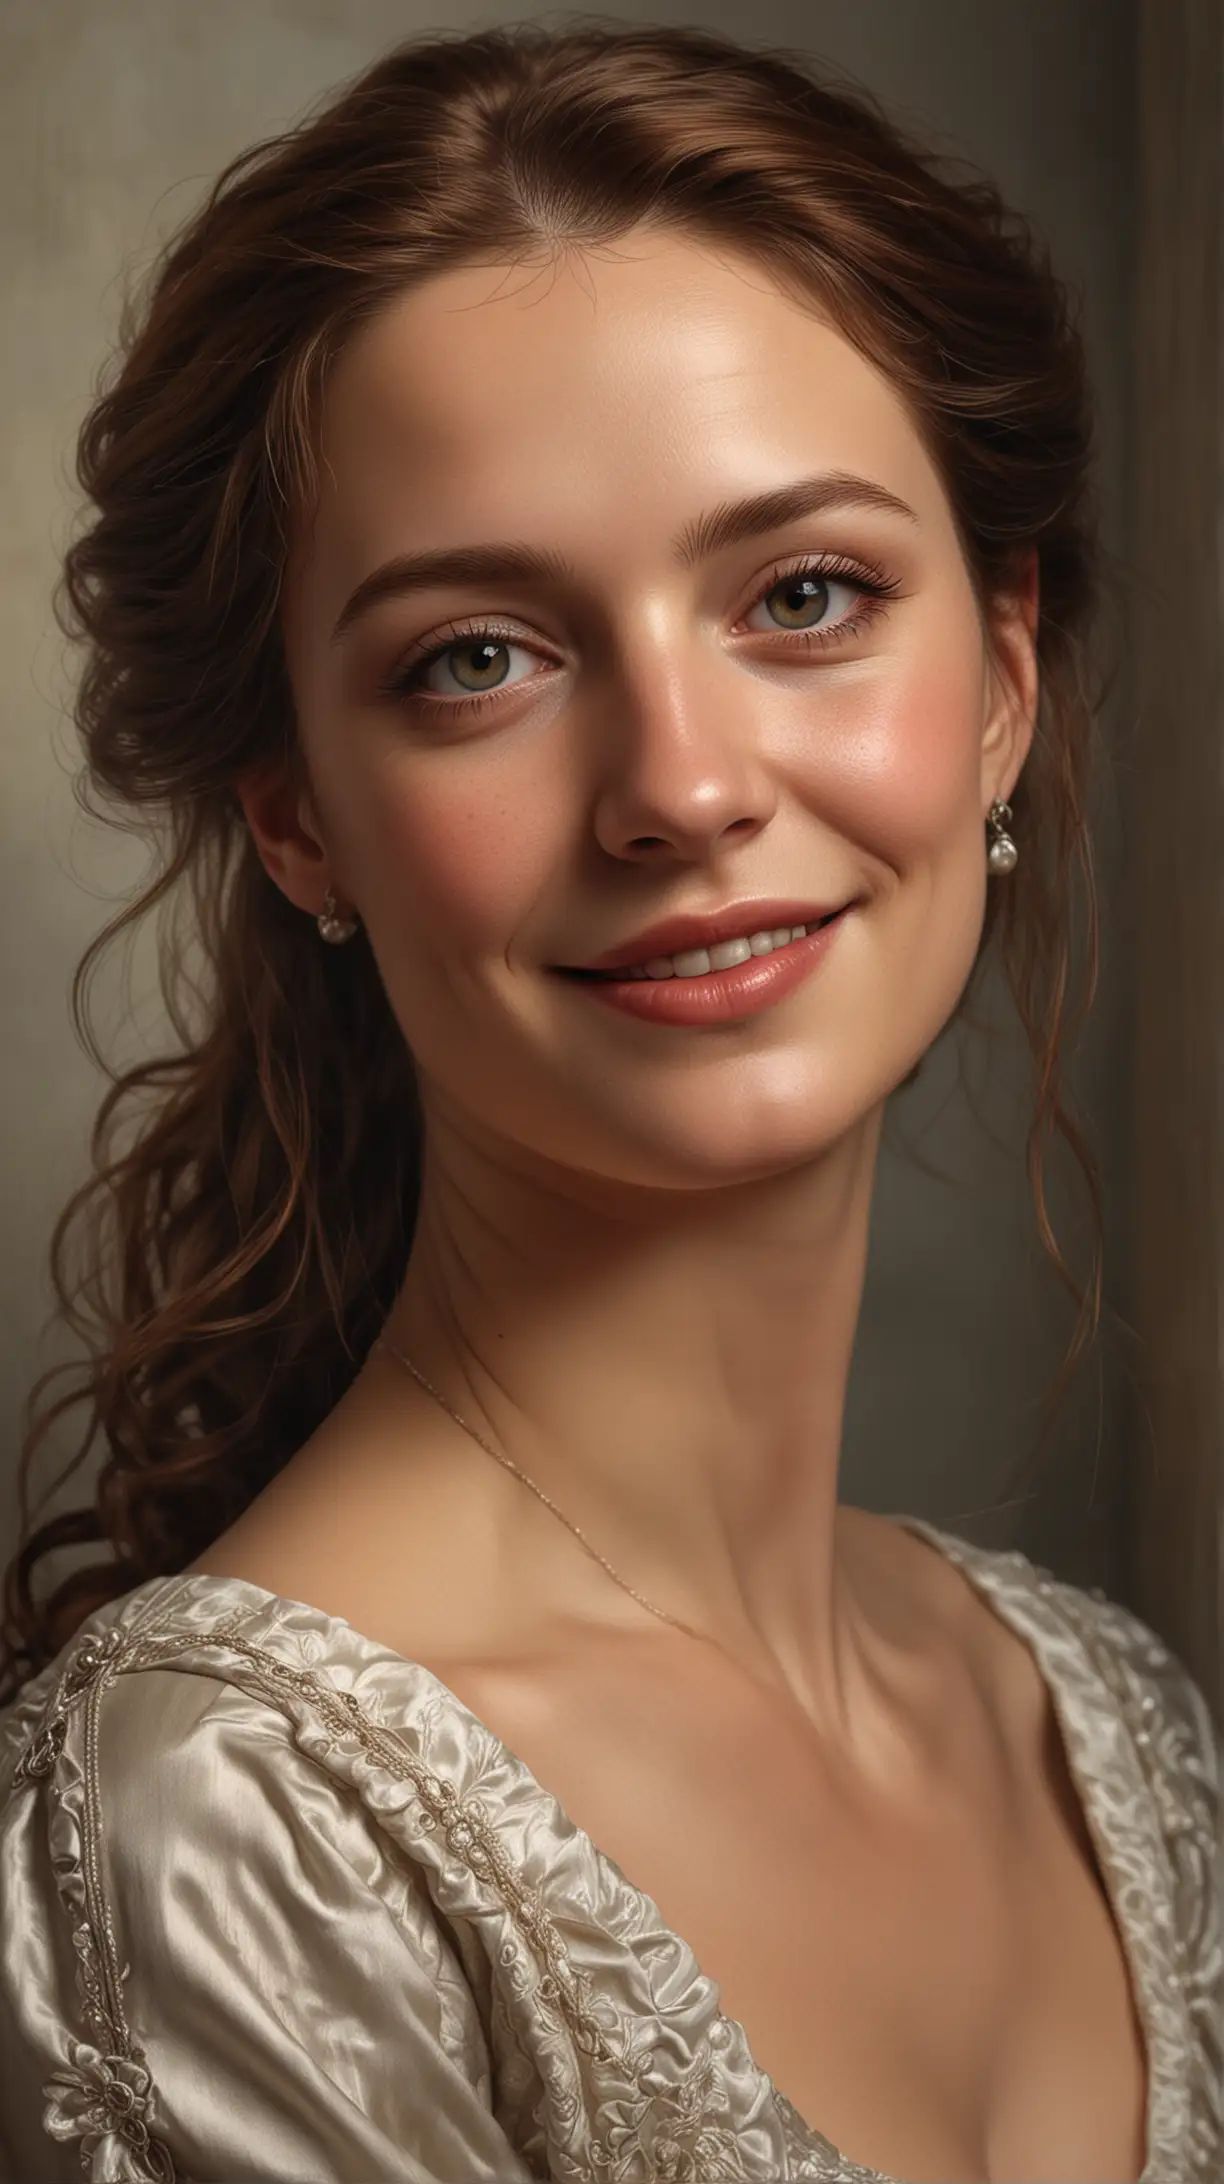 Blend Renaissance portraiture with modern photorealism.
Capture european woman's gentle smile and the subtle strength in her gaze.
Ensure the lighting is soft and emphasizes the elegance of her attire.